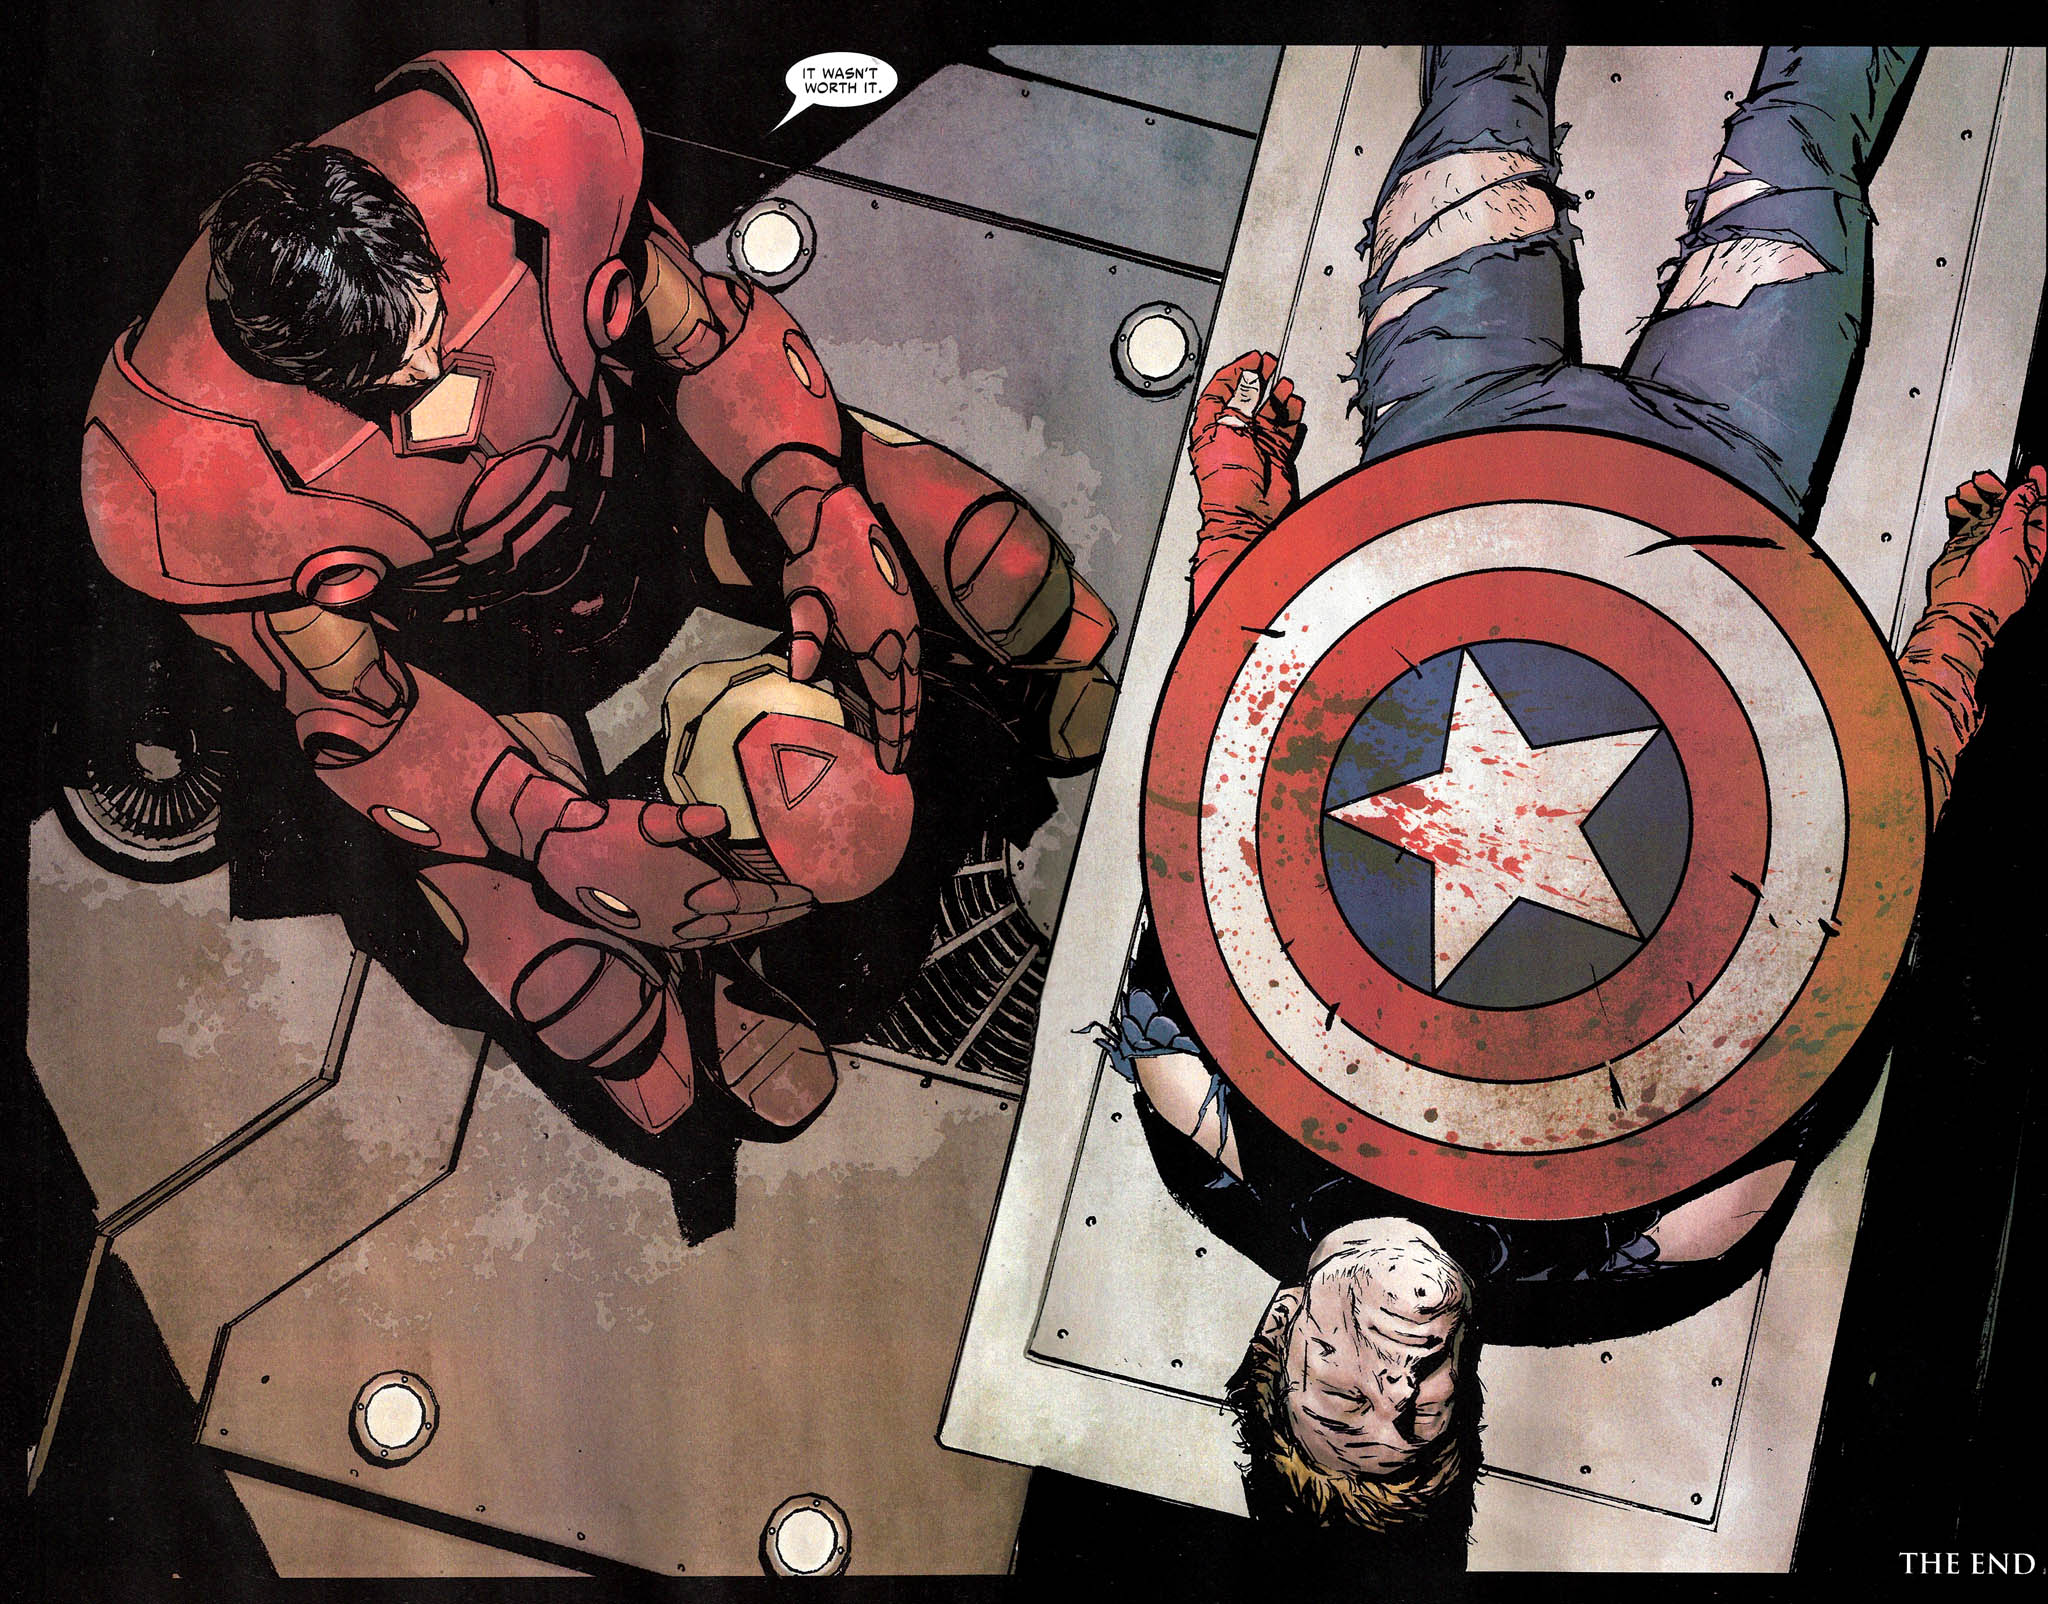 Iron Man and Captain America team up in an epic battle.